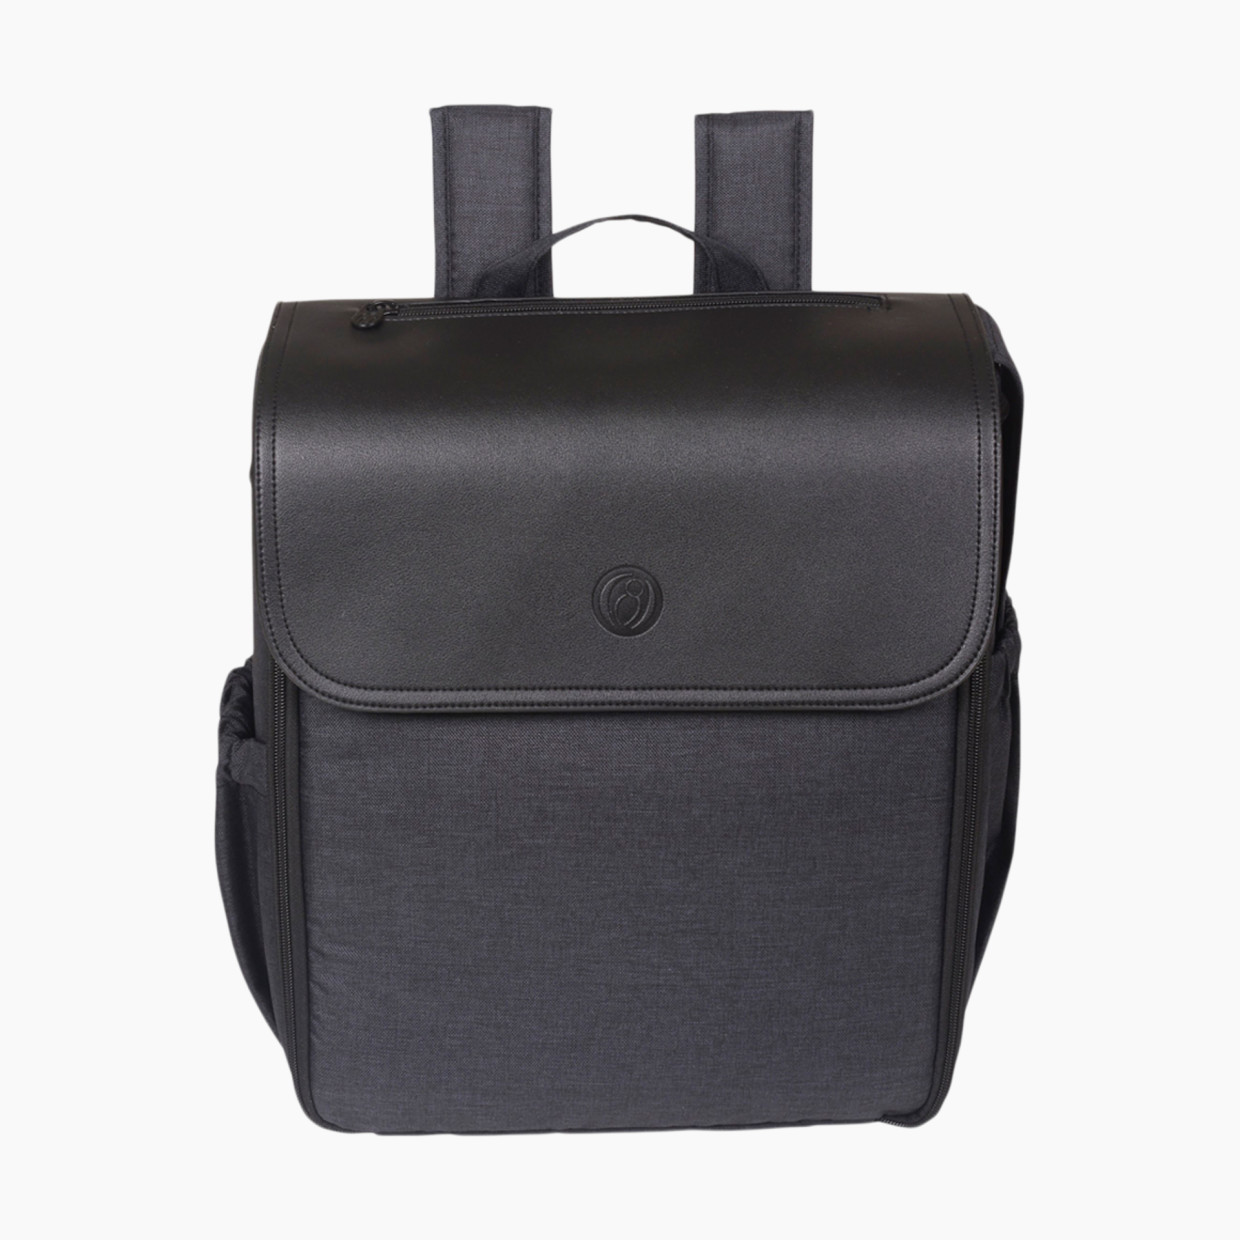 Lulyboo Diaper Cubby Backpack - Black.